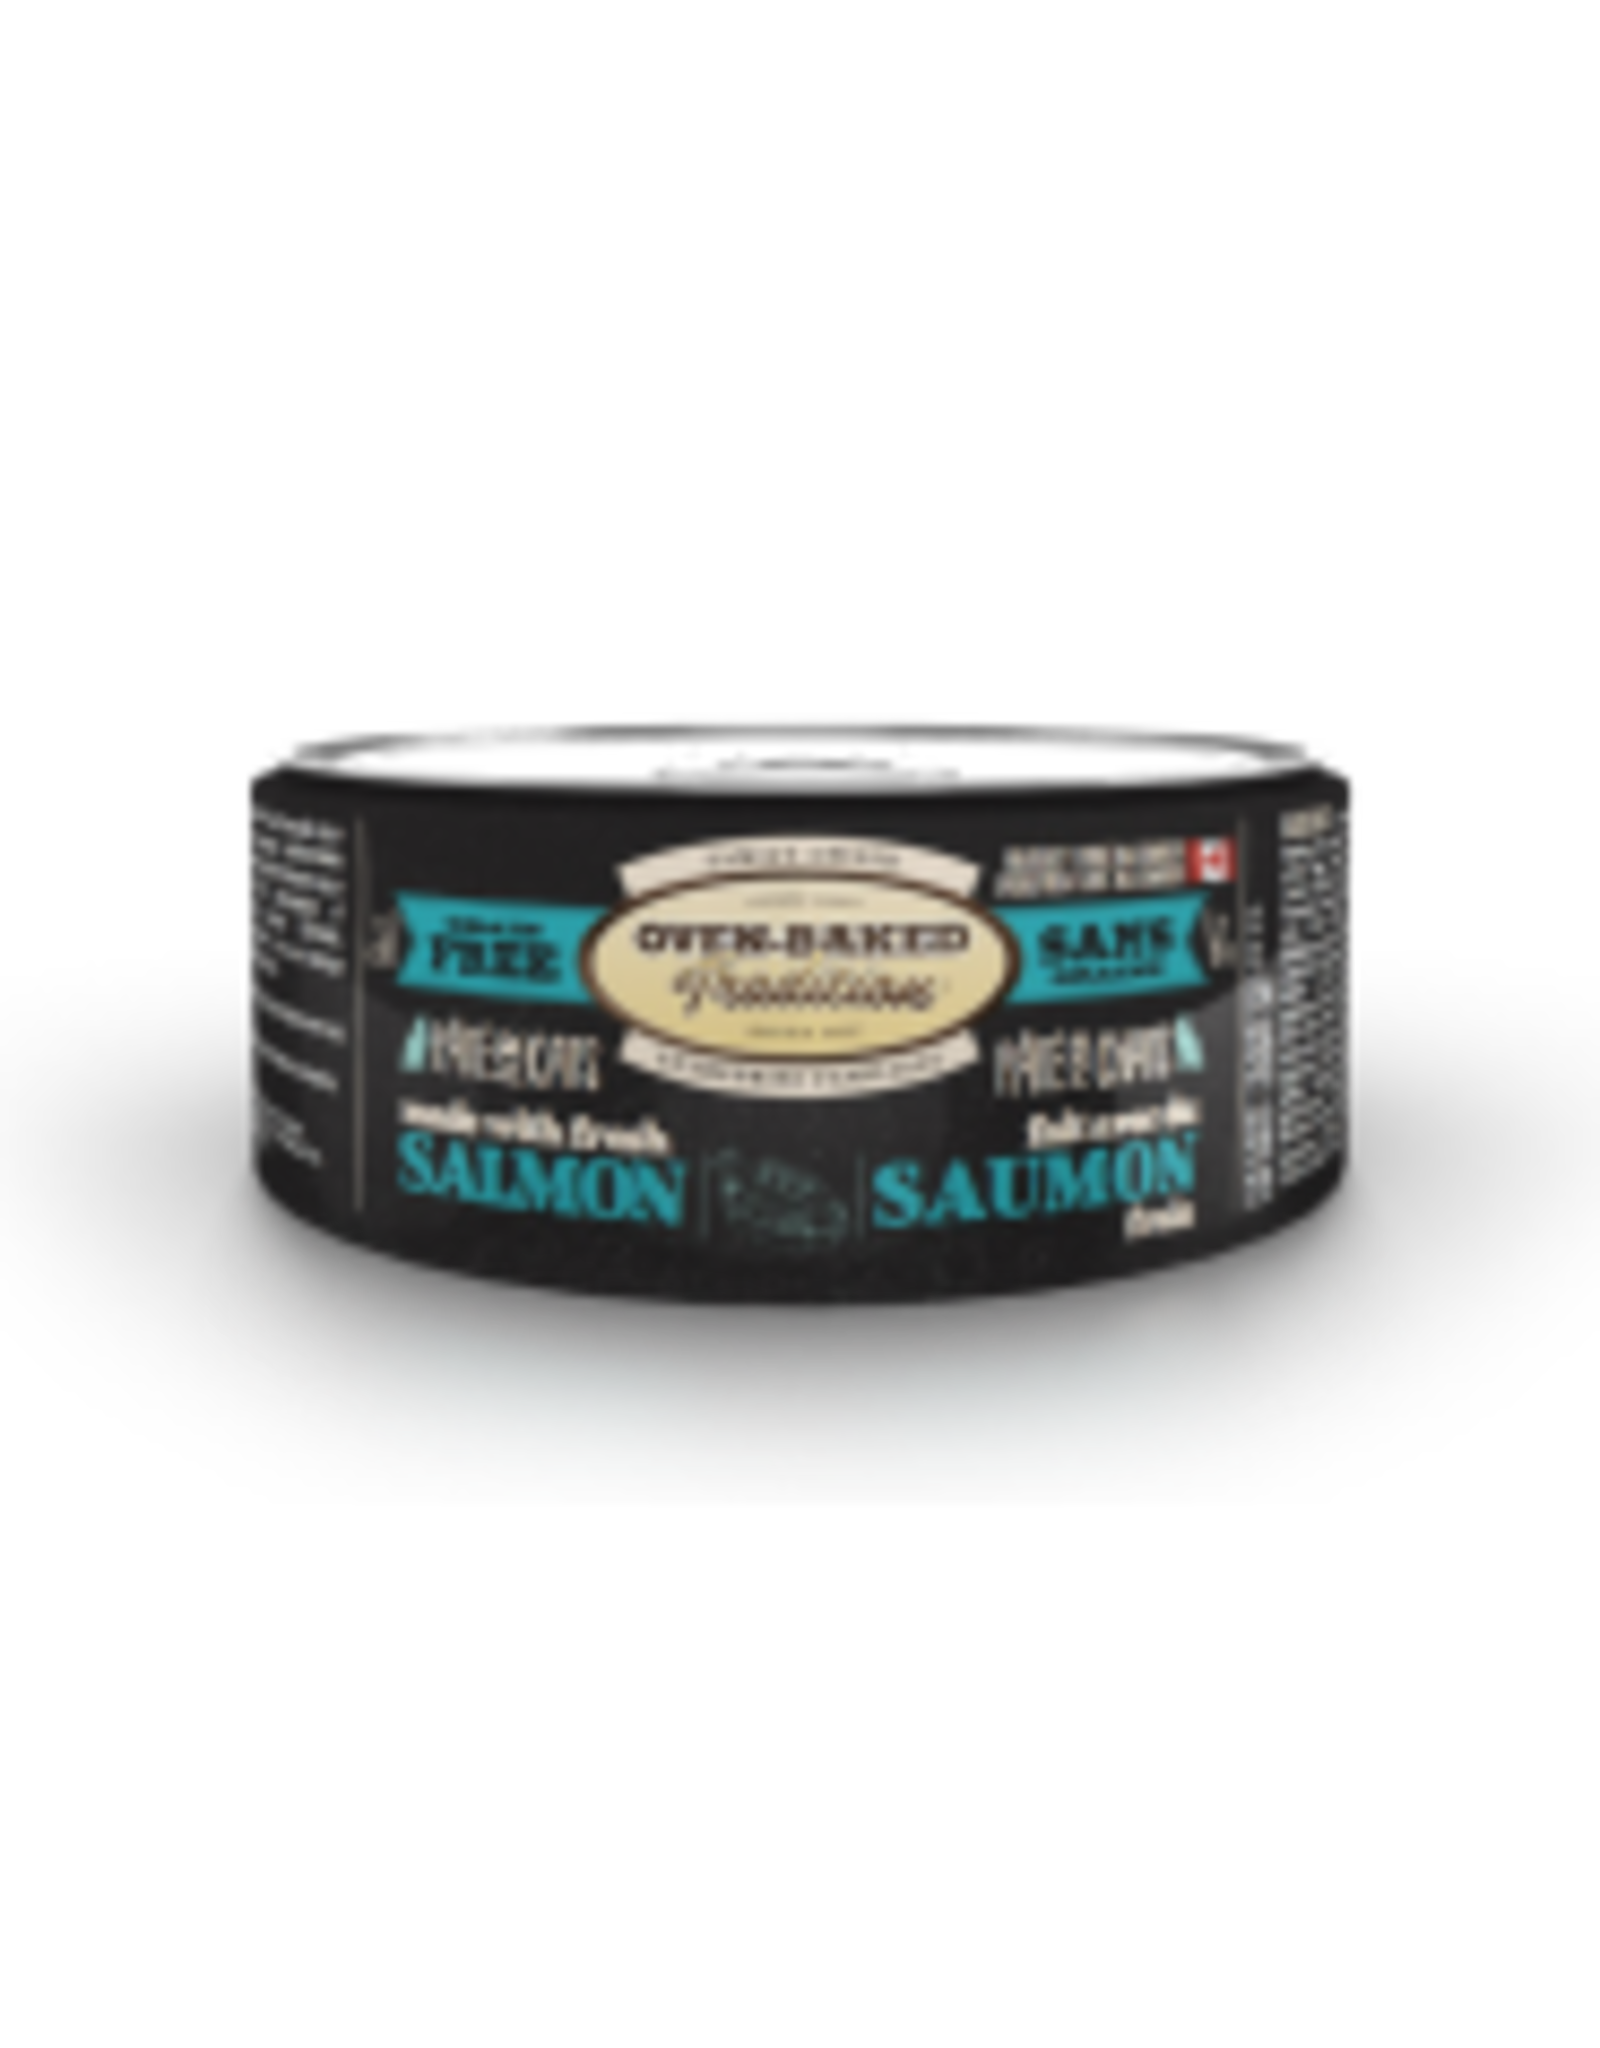 Oven-Baked Tradition Cat GF Adult Salmon Pate 5.5 oz